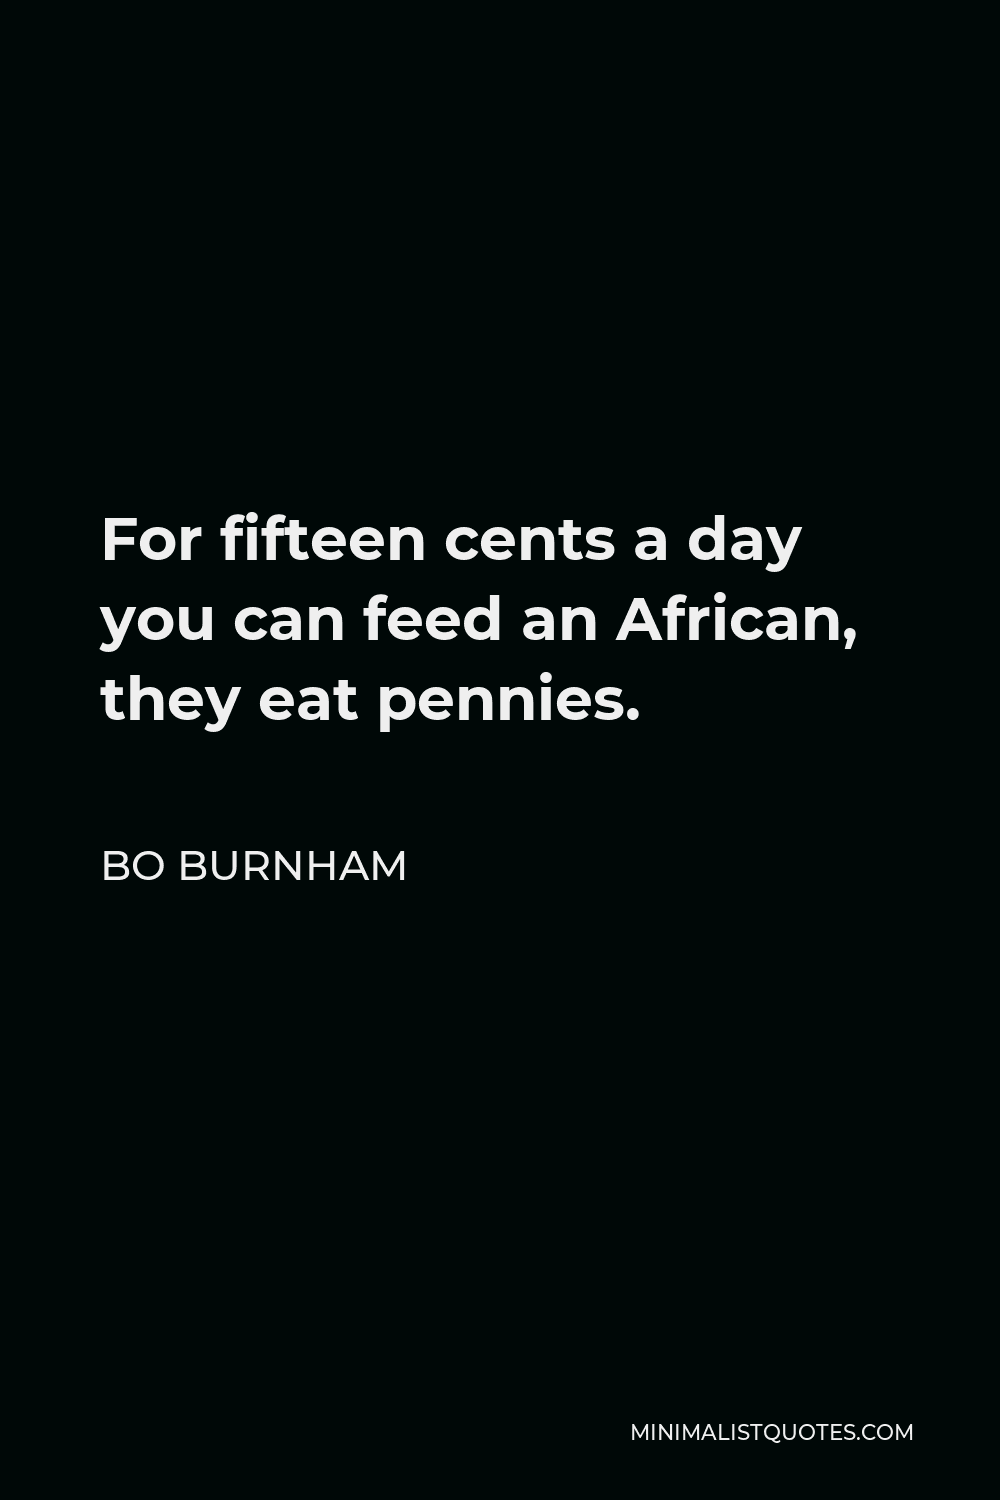 Bo Burnham Quote - For fifteen cents a day you can feed an African, they eat pennies.